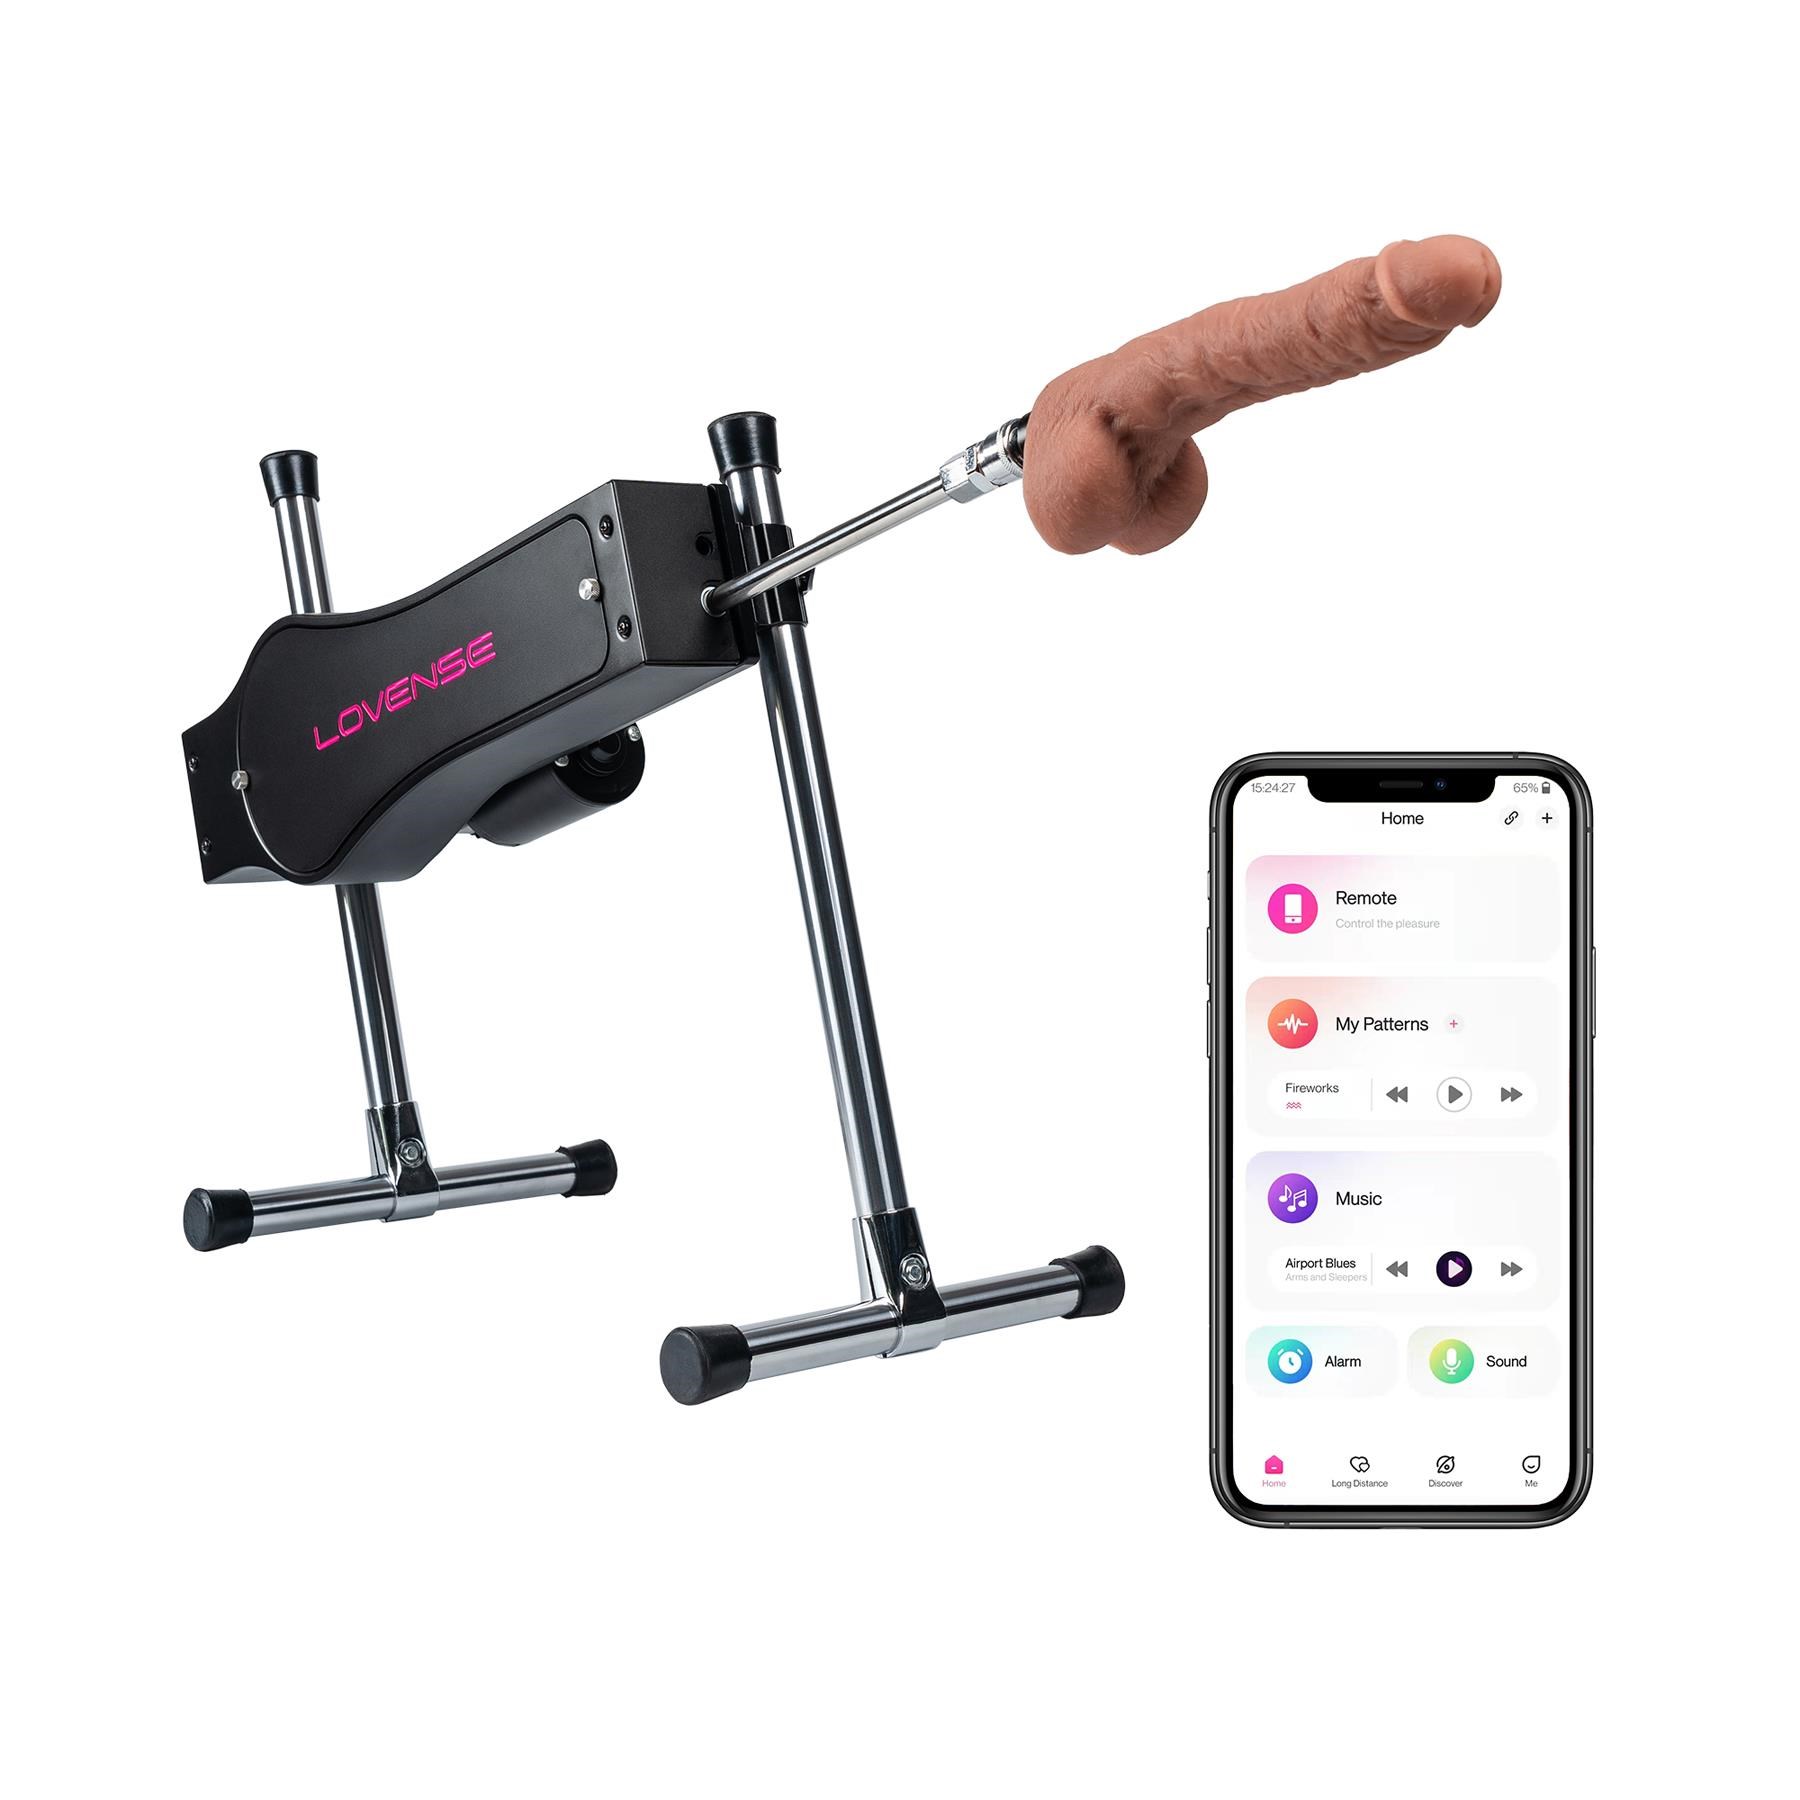 Lovense Bluetooth Sex Machine - Product and App